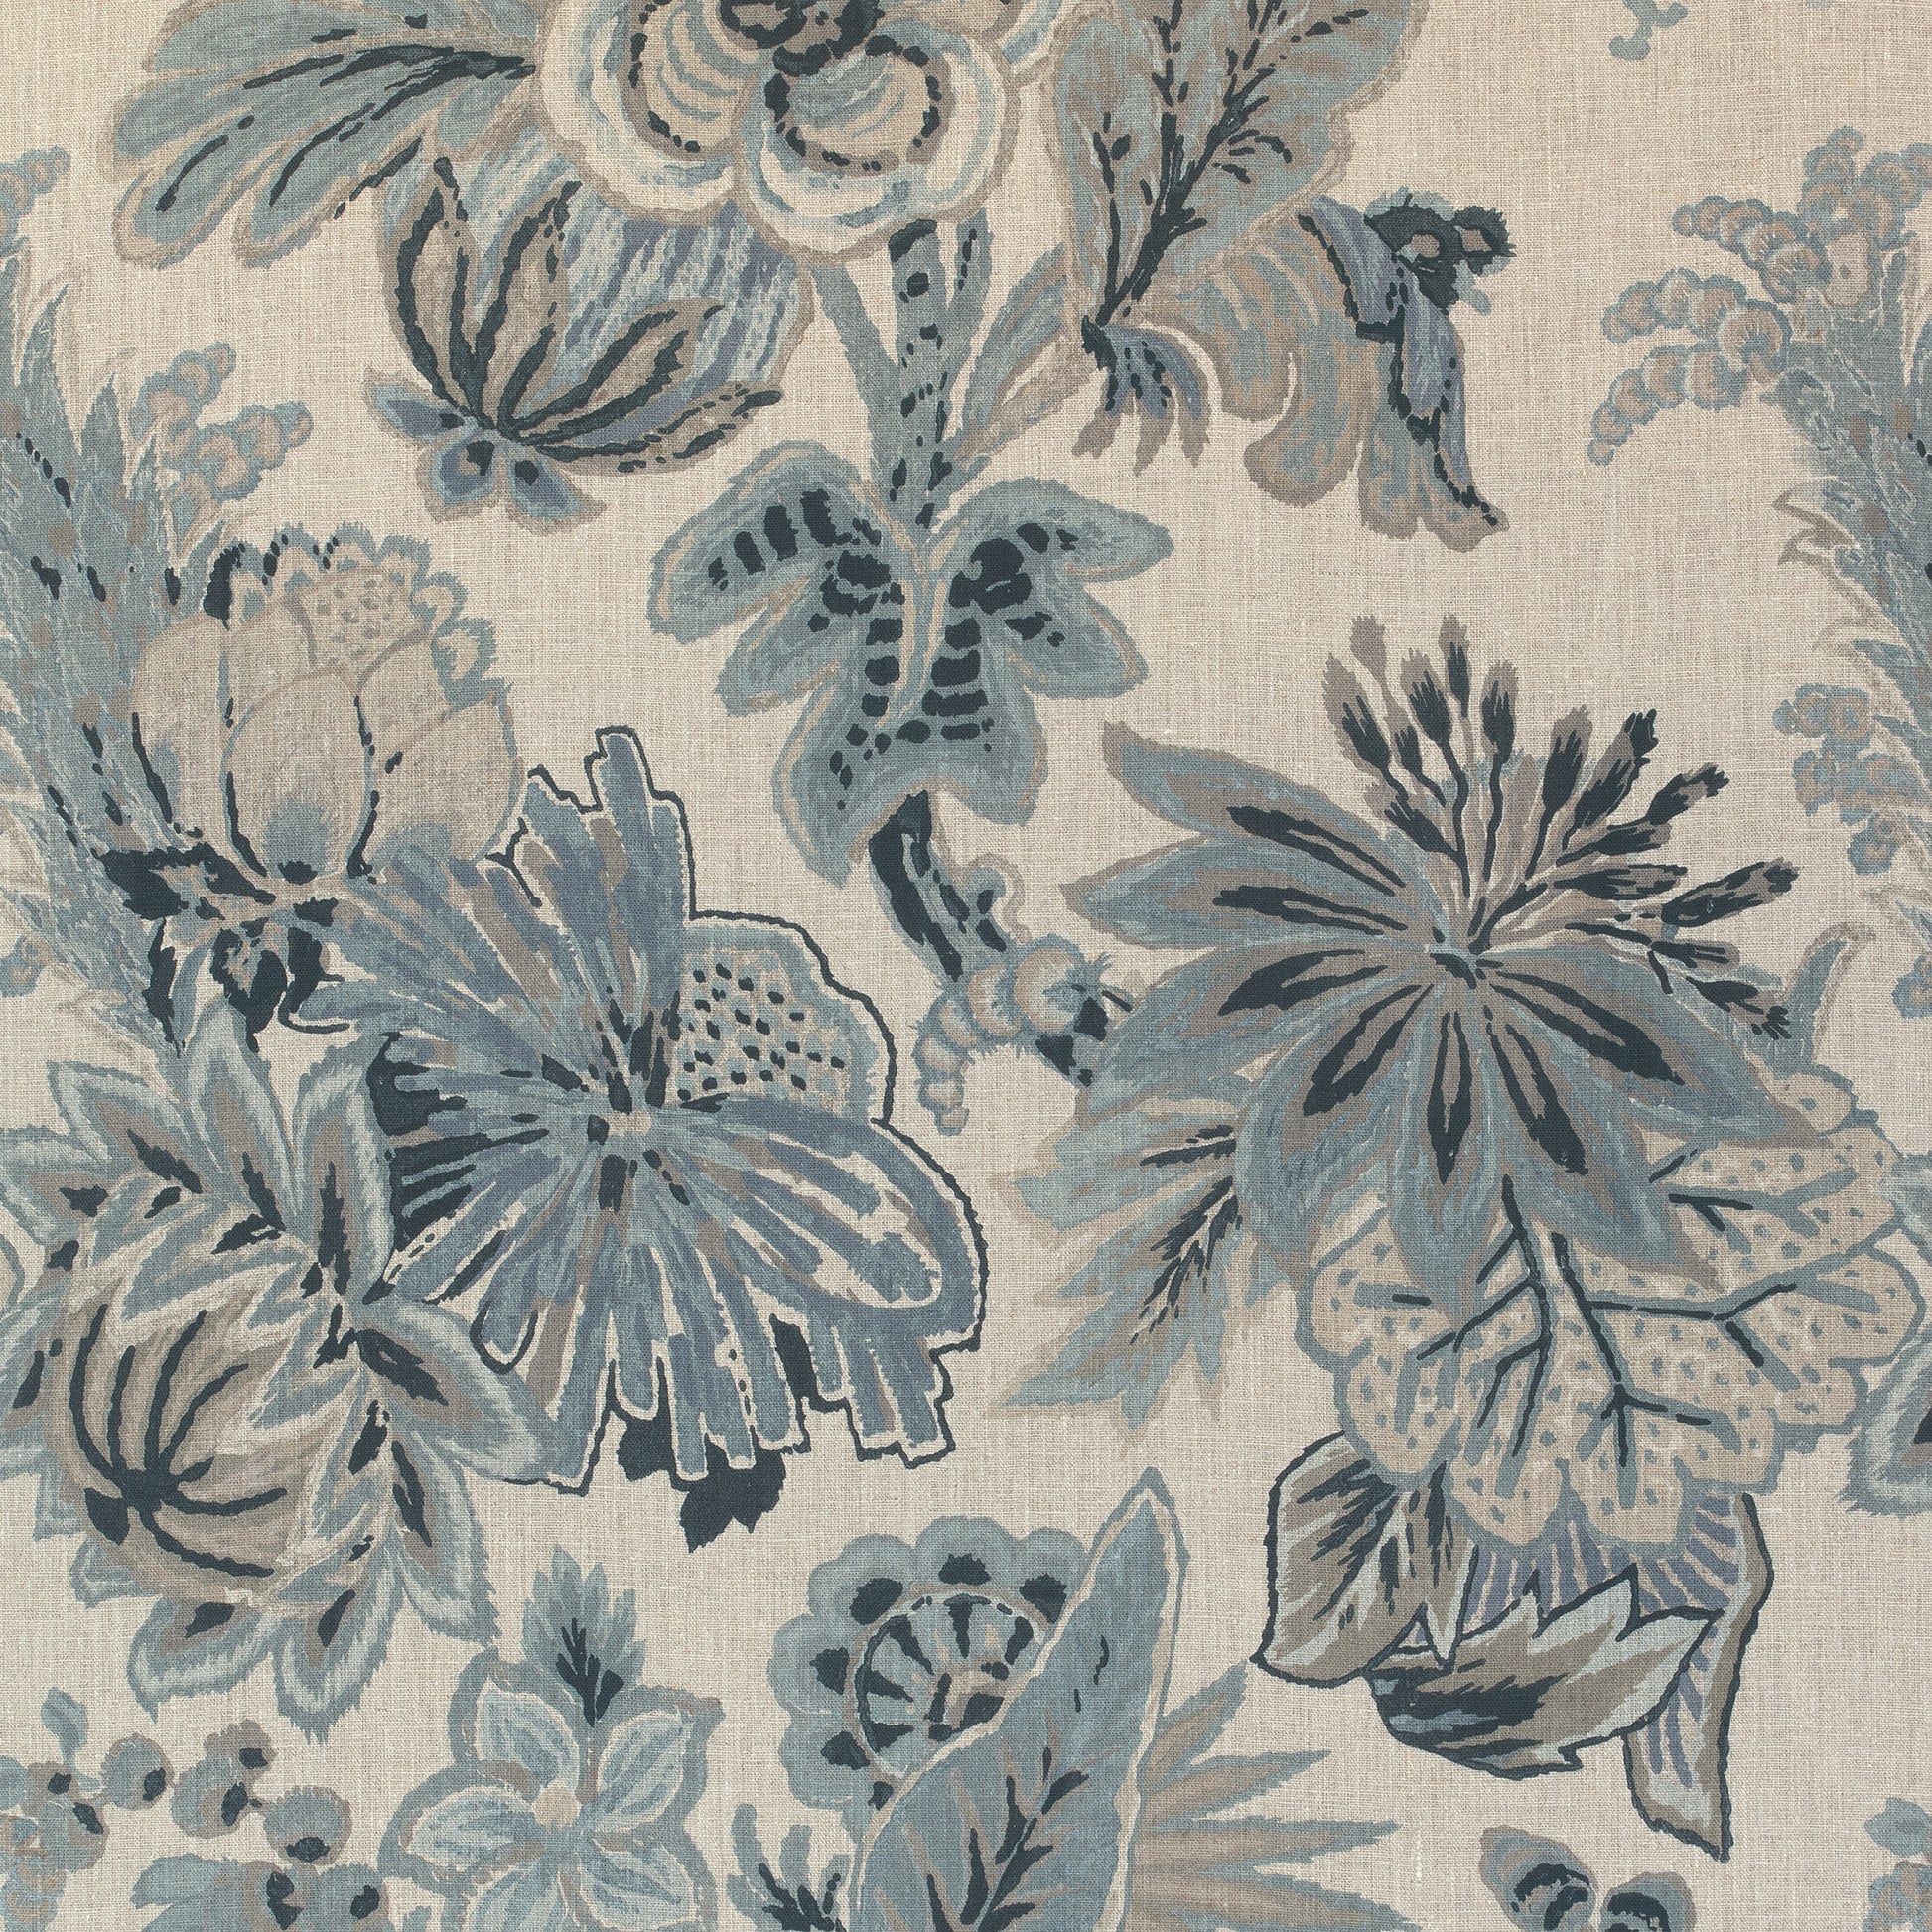 Buy samples of F910214 Floral Gala Printed Colony Thibaut Fabrics